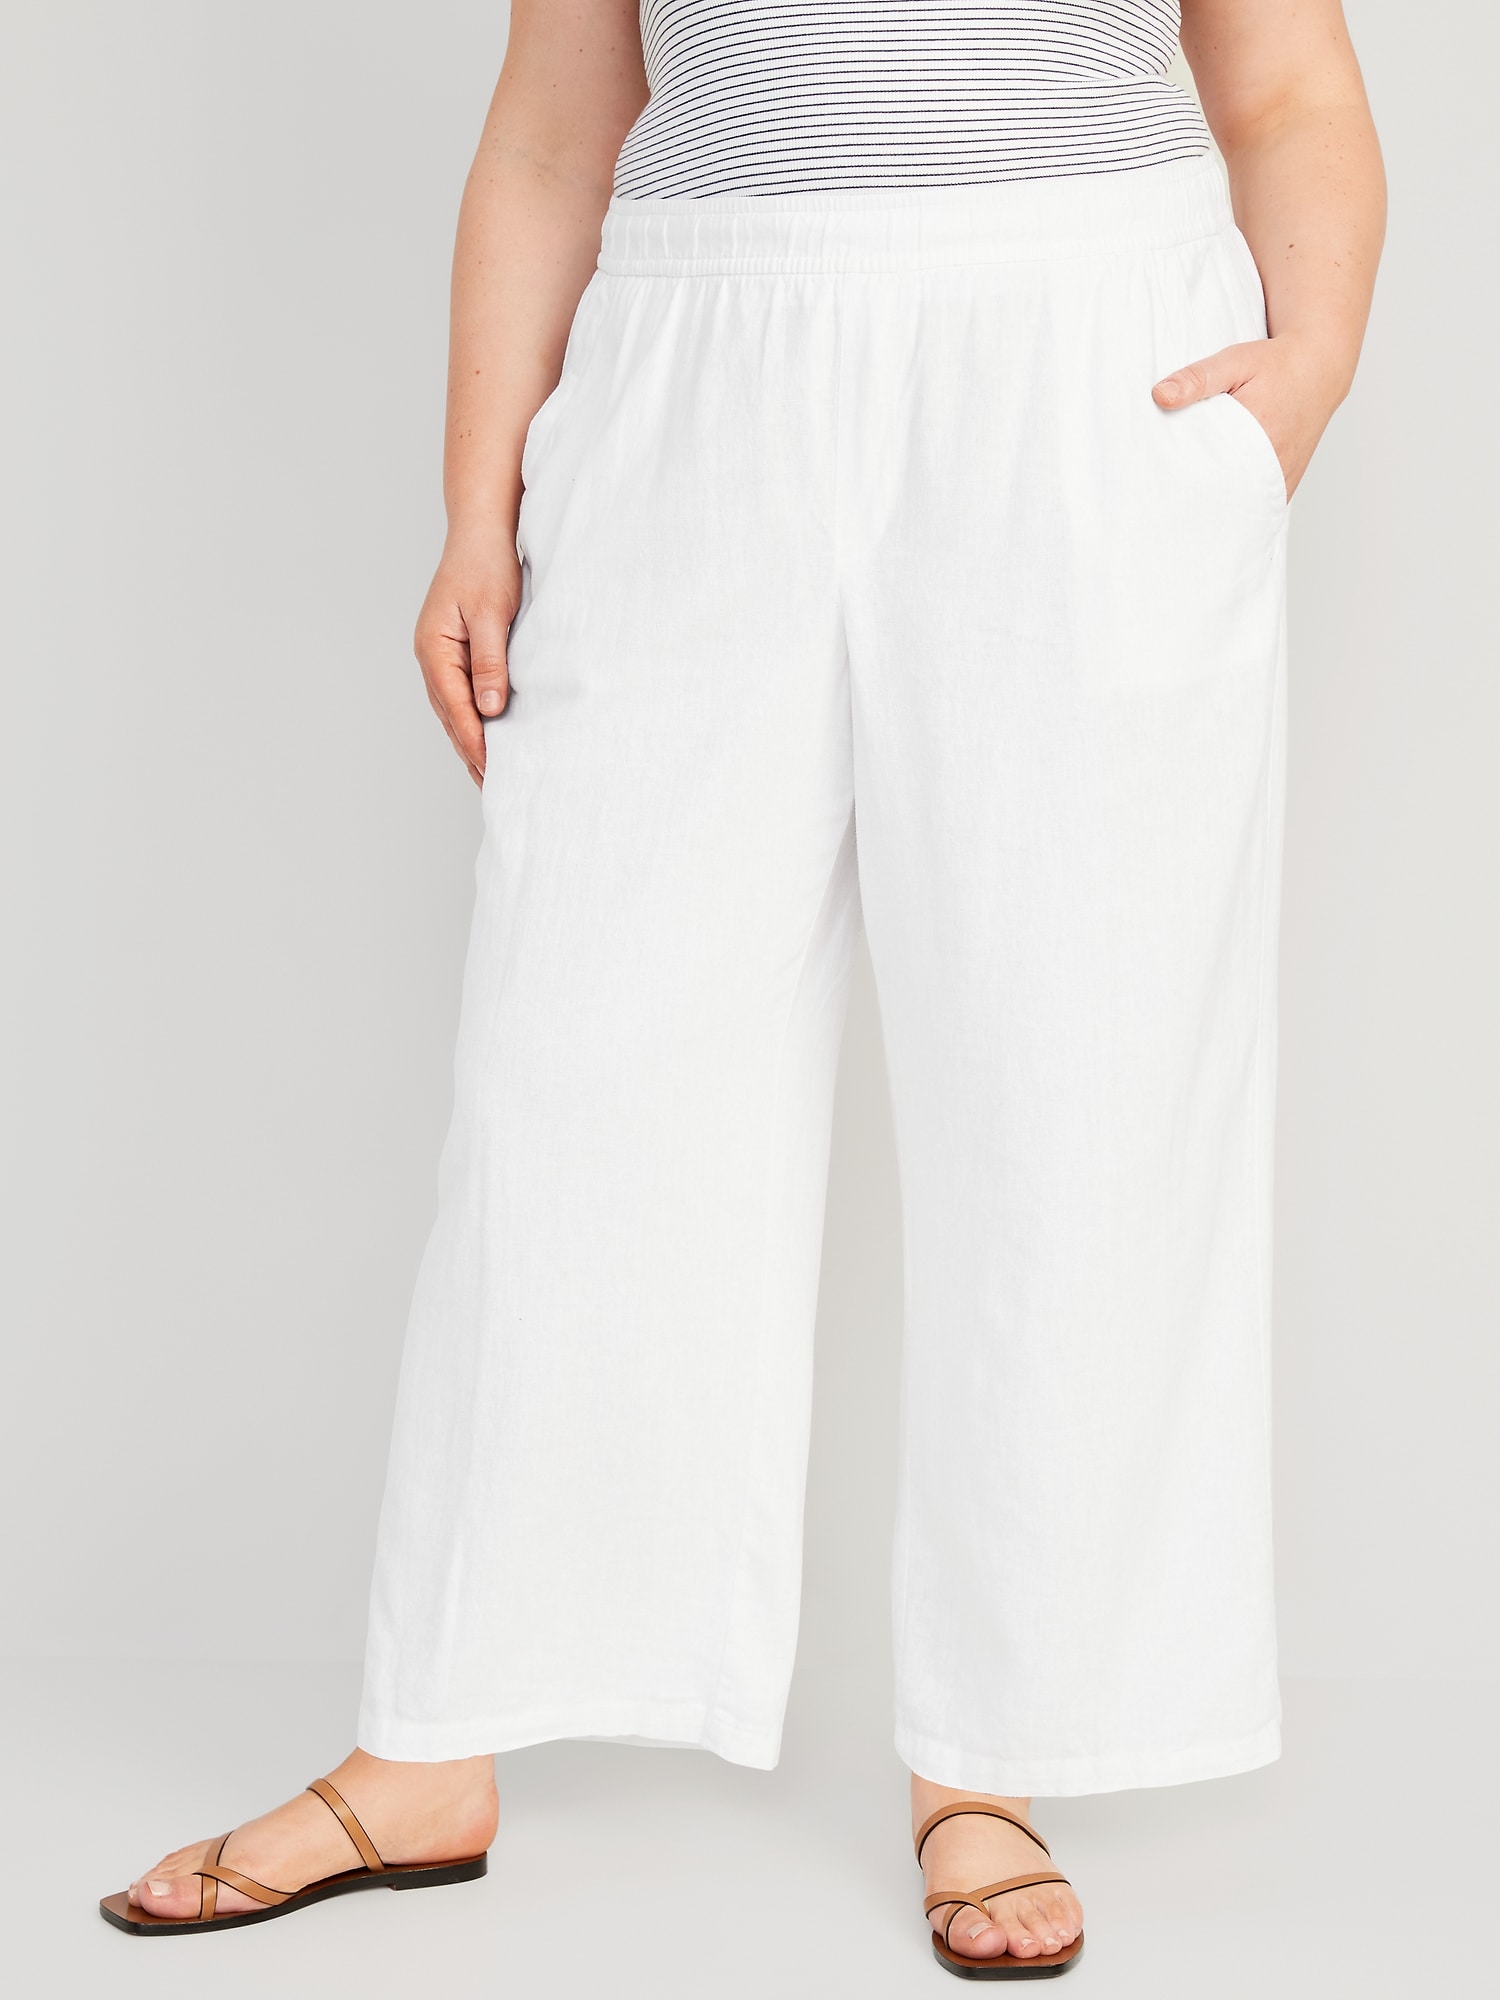 Plus Size Pants High Waisted